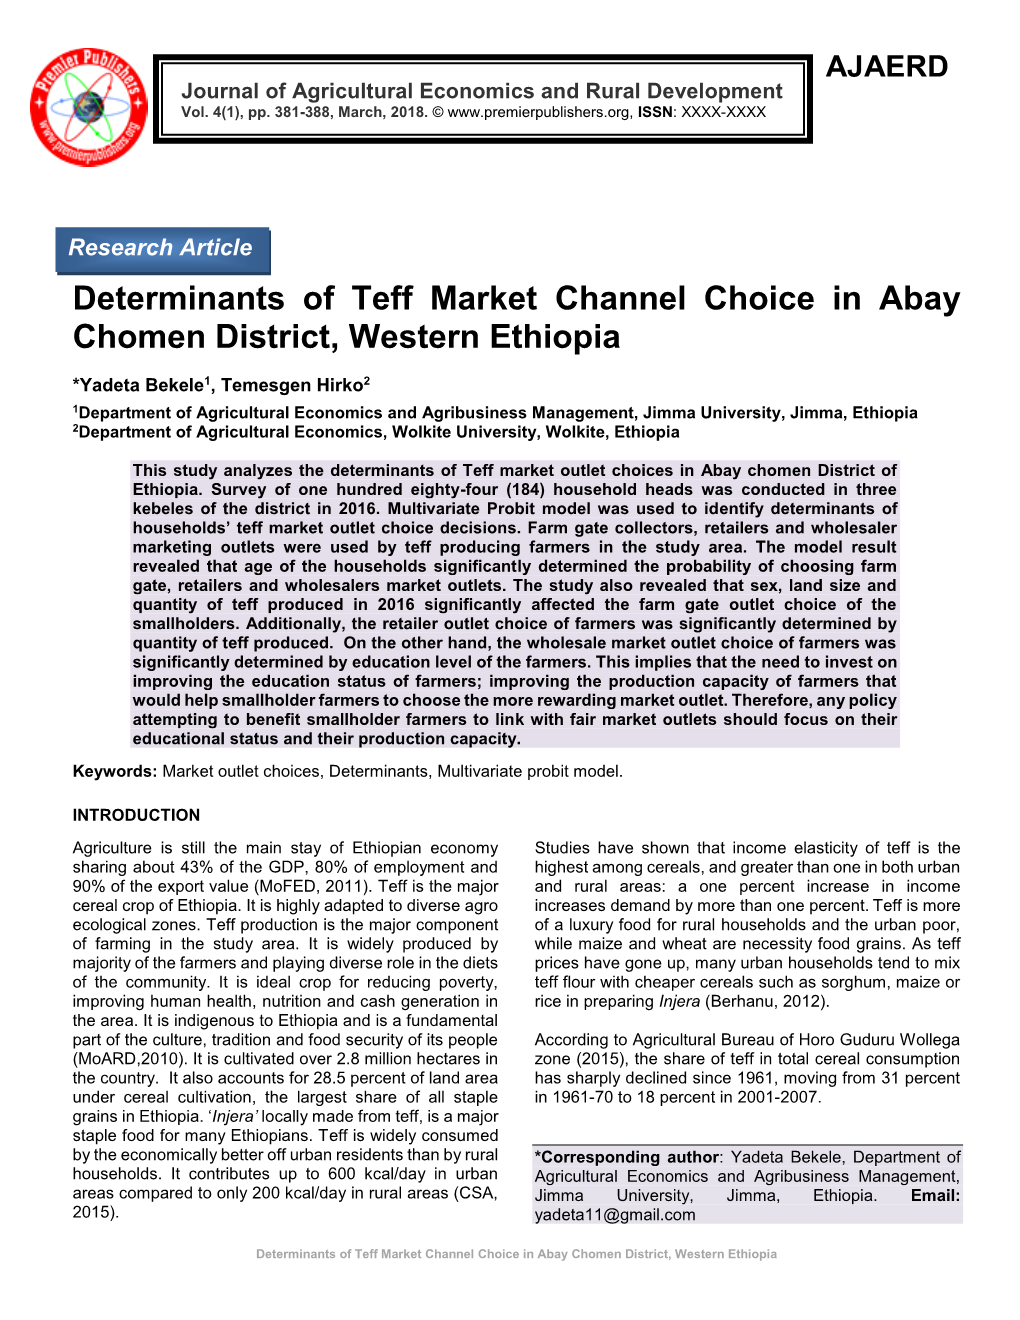 Determinants of Teff Market Channel Choice in Abay Chomen District, Western Ethiopia